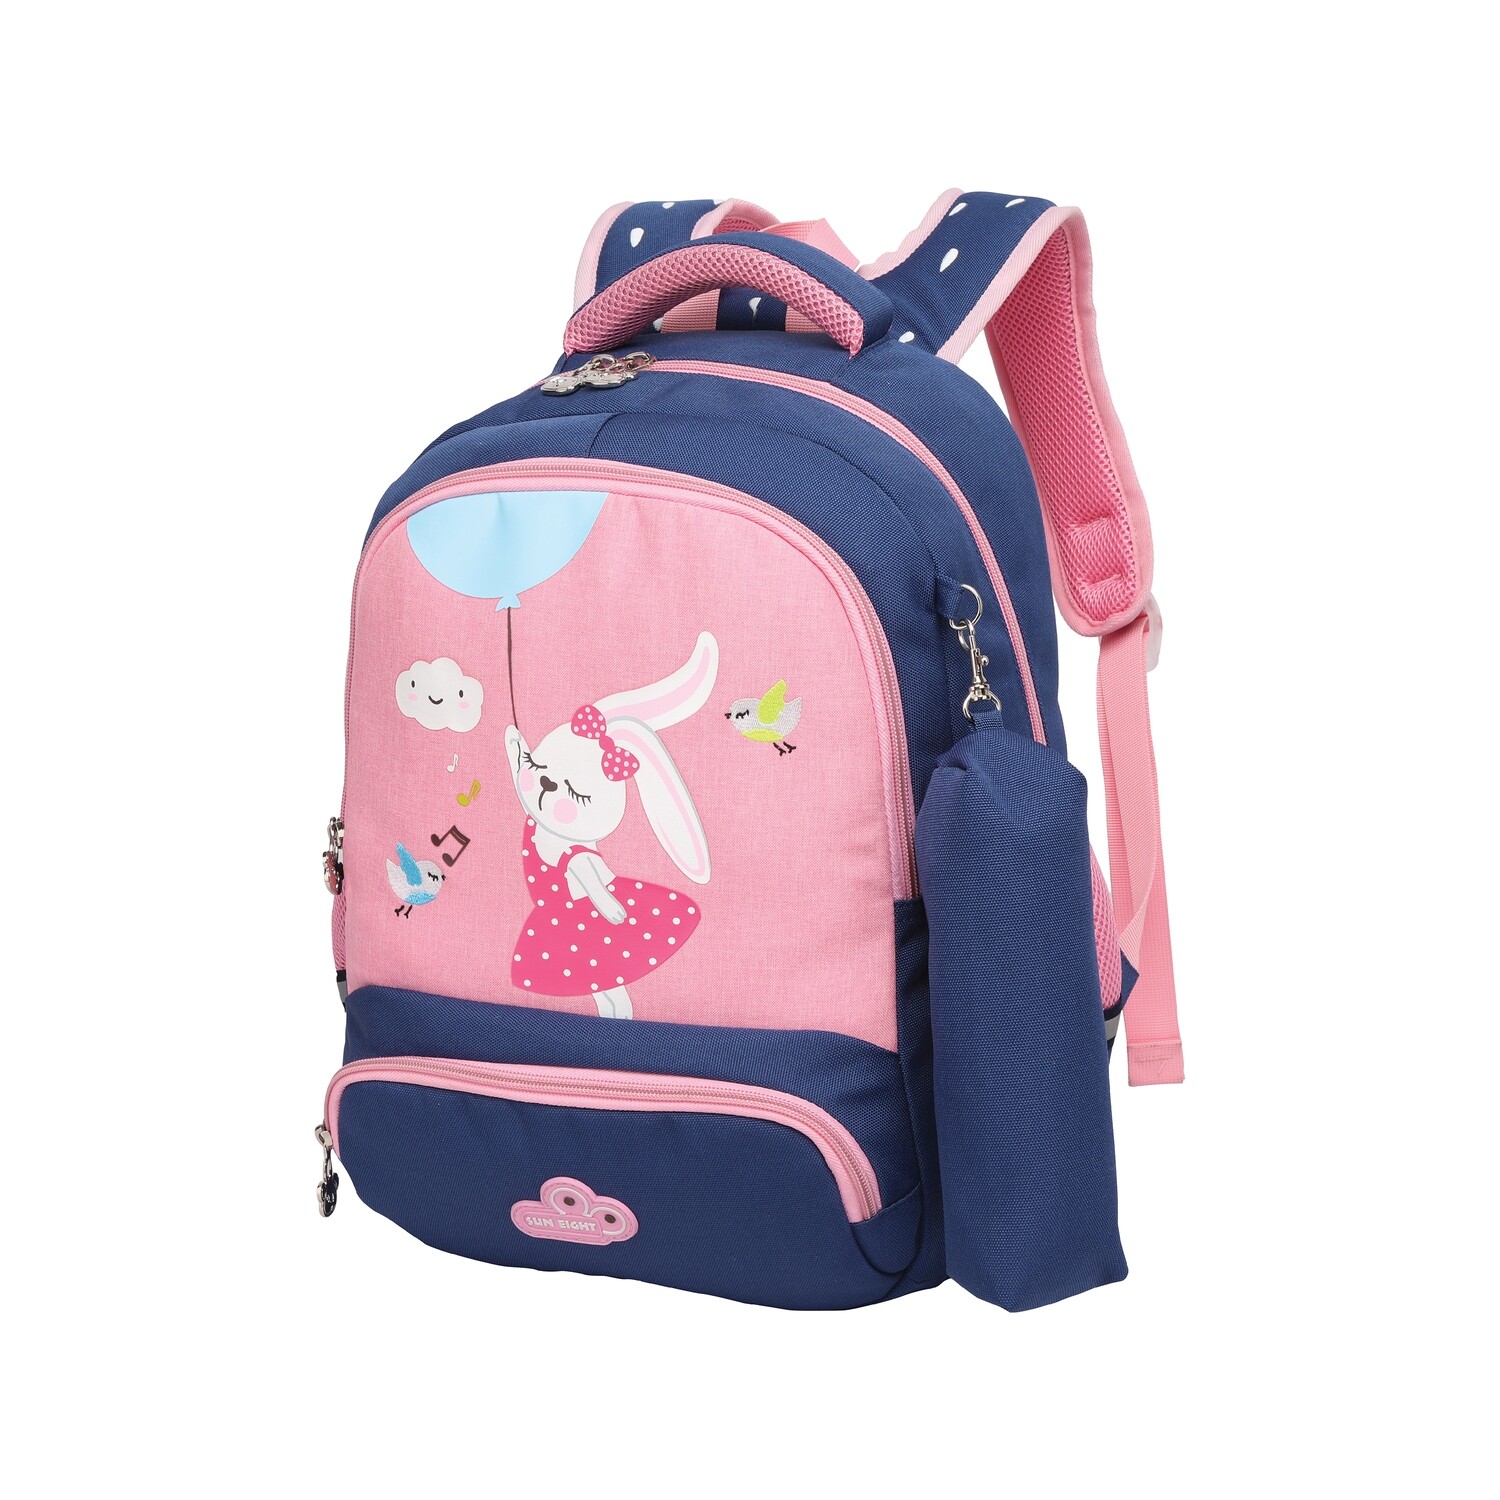 White Rabbit Print Kids Backpack with Pencil Pouch (Nursery Grade)